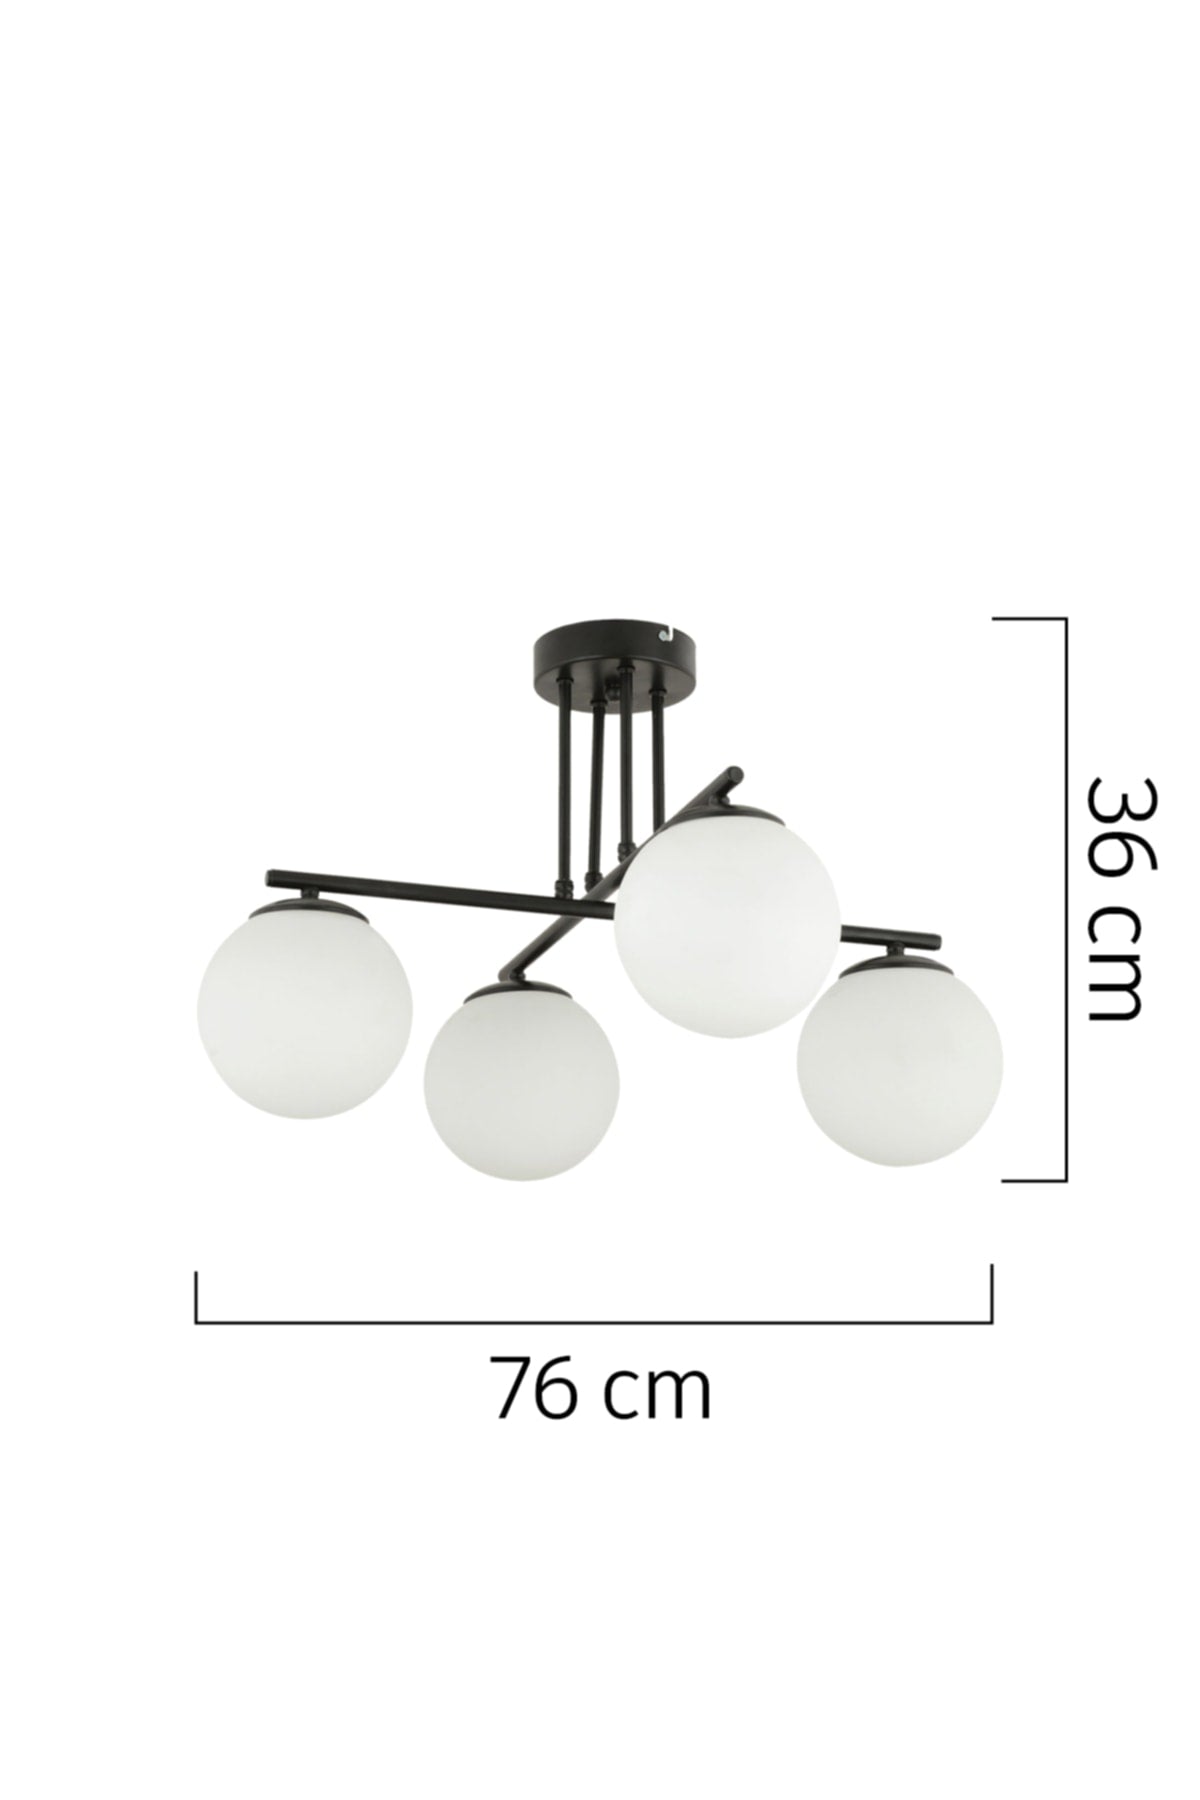 Mali 4-Piece Black Chandelier with White Glass Modern Young Room Kitchen Bedroom Retro Living Room Chandelier